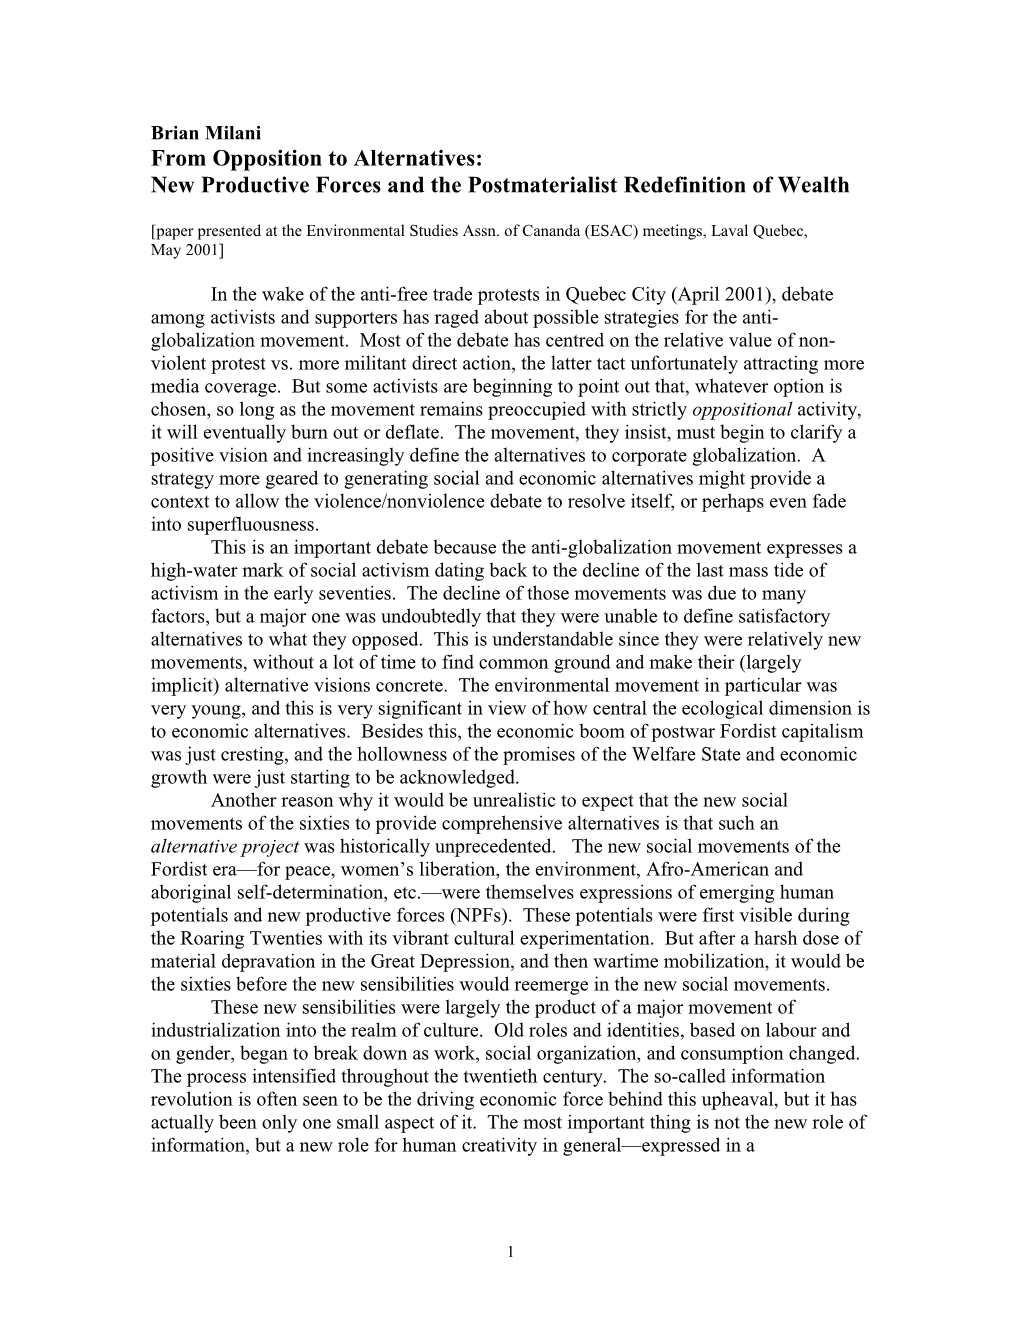 New Productive Forces and the Postmaterialist Redefinition of Wealth